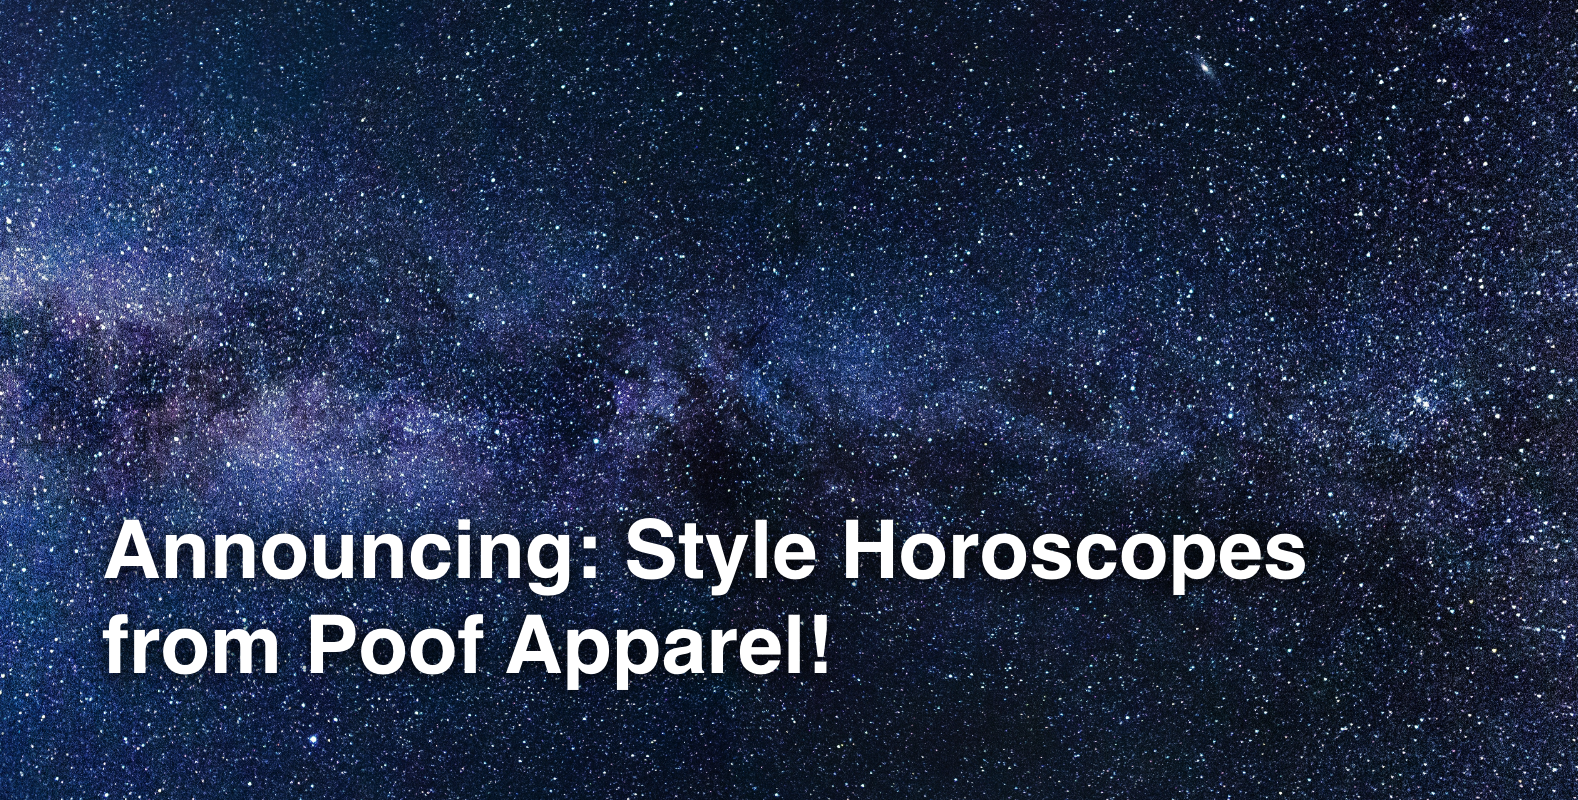 Announcing: Style Horoscopes from Poof Apparel!